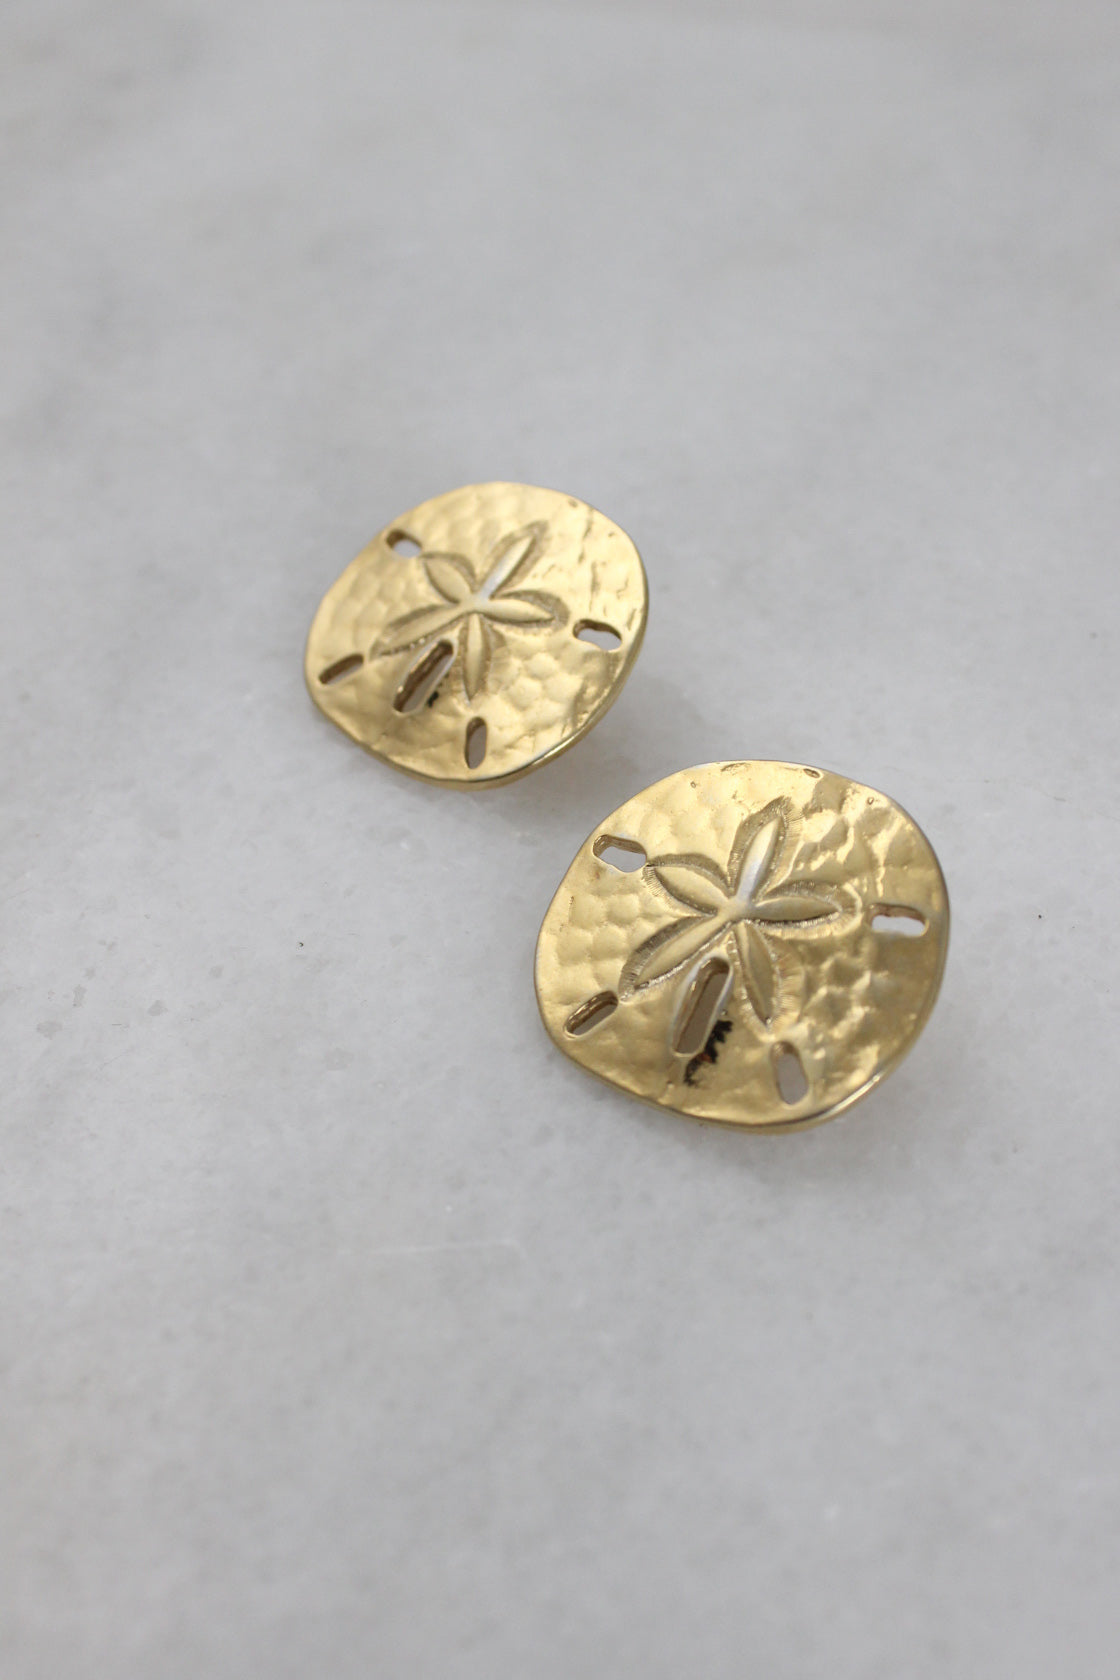  ¾ top view of golden earrings highlighting hammered face with sand dollar-like detailing